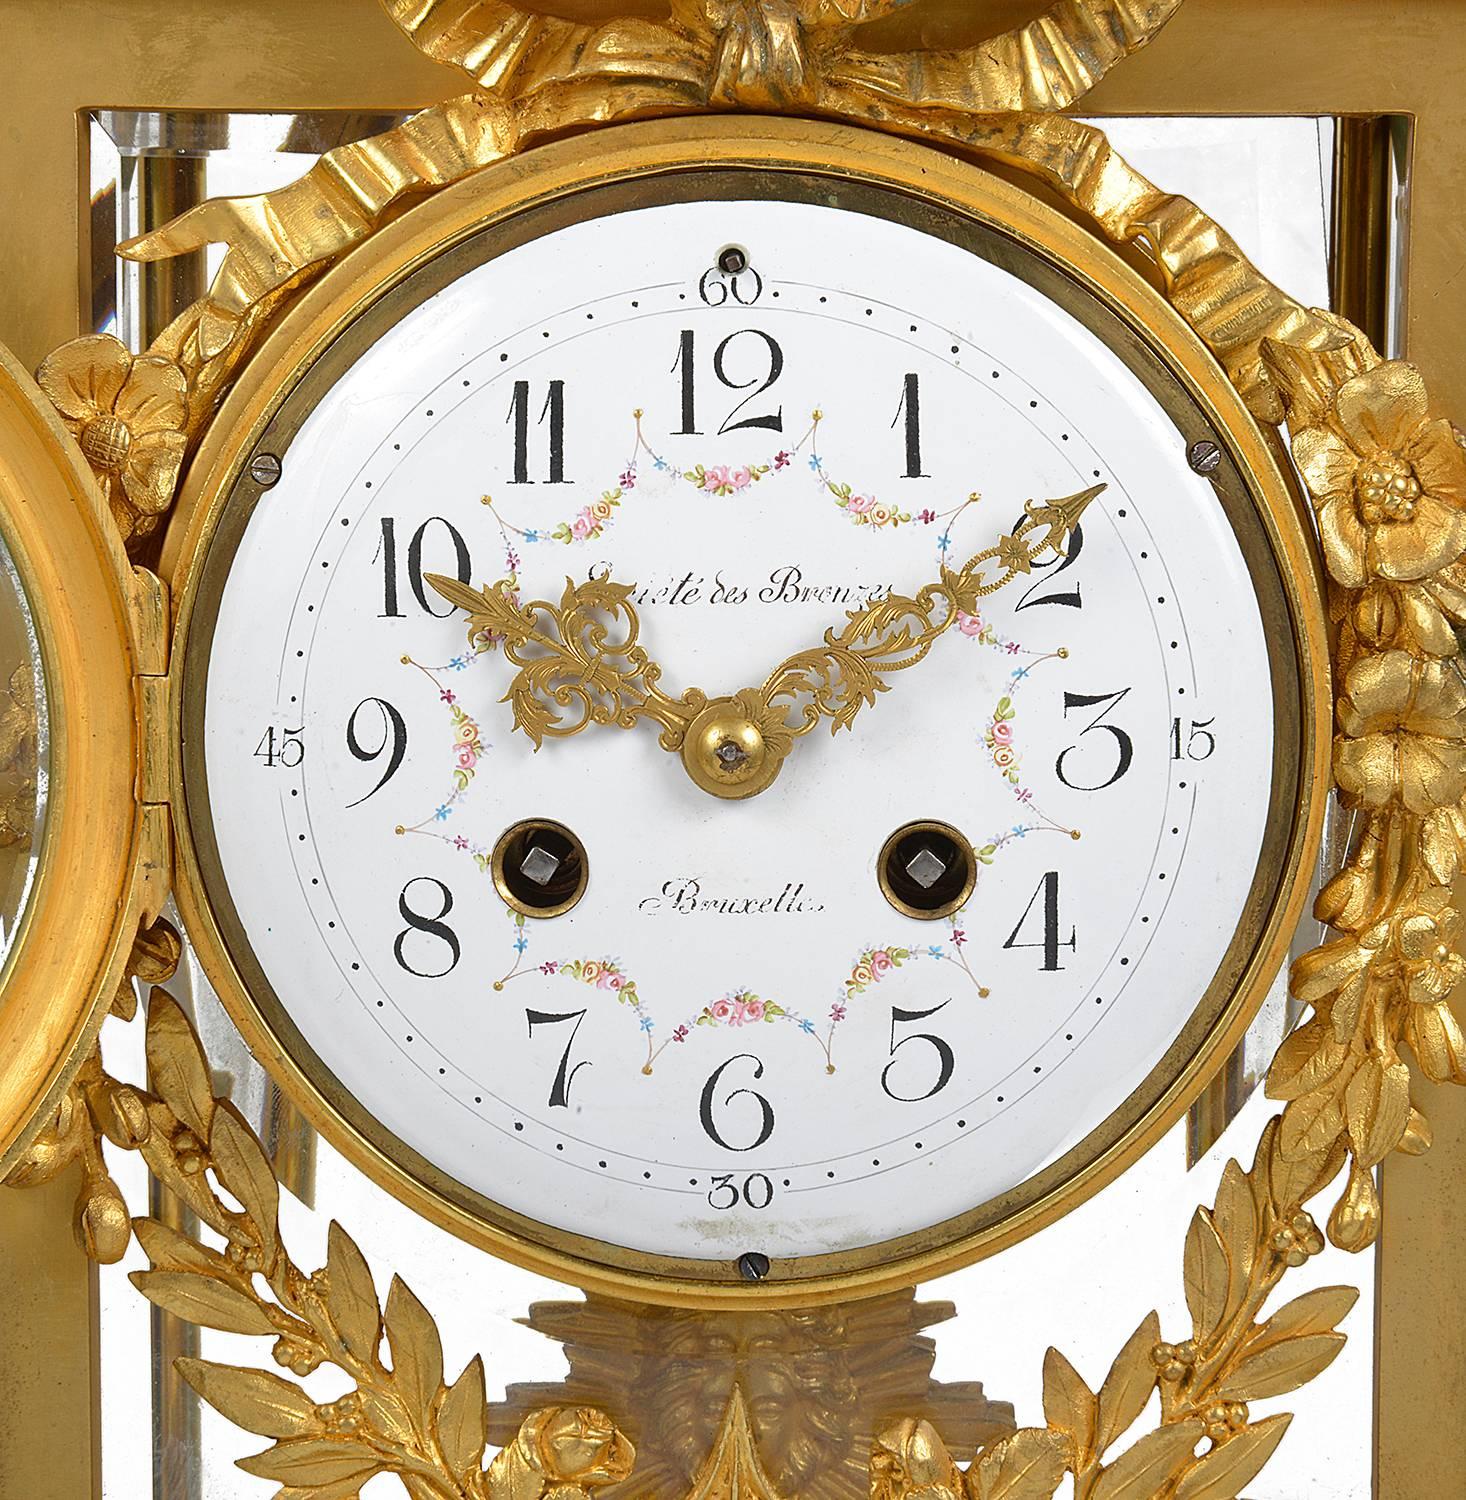 A good quality 19th century French gilded, Louis XVI style ormolu mantel clock. Having a gilded wreath and arrow sheath above a white marble top, ormolu four glass case, with a white enamel clock face, an eight day striking movement, flower and